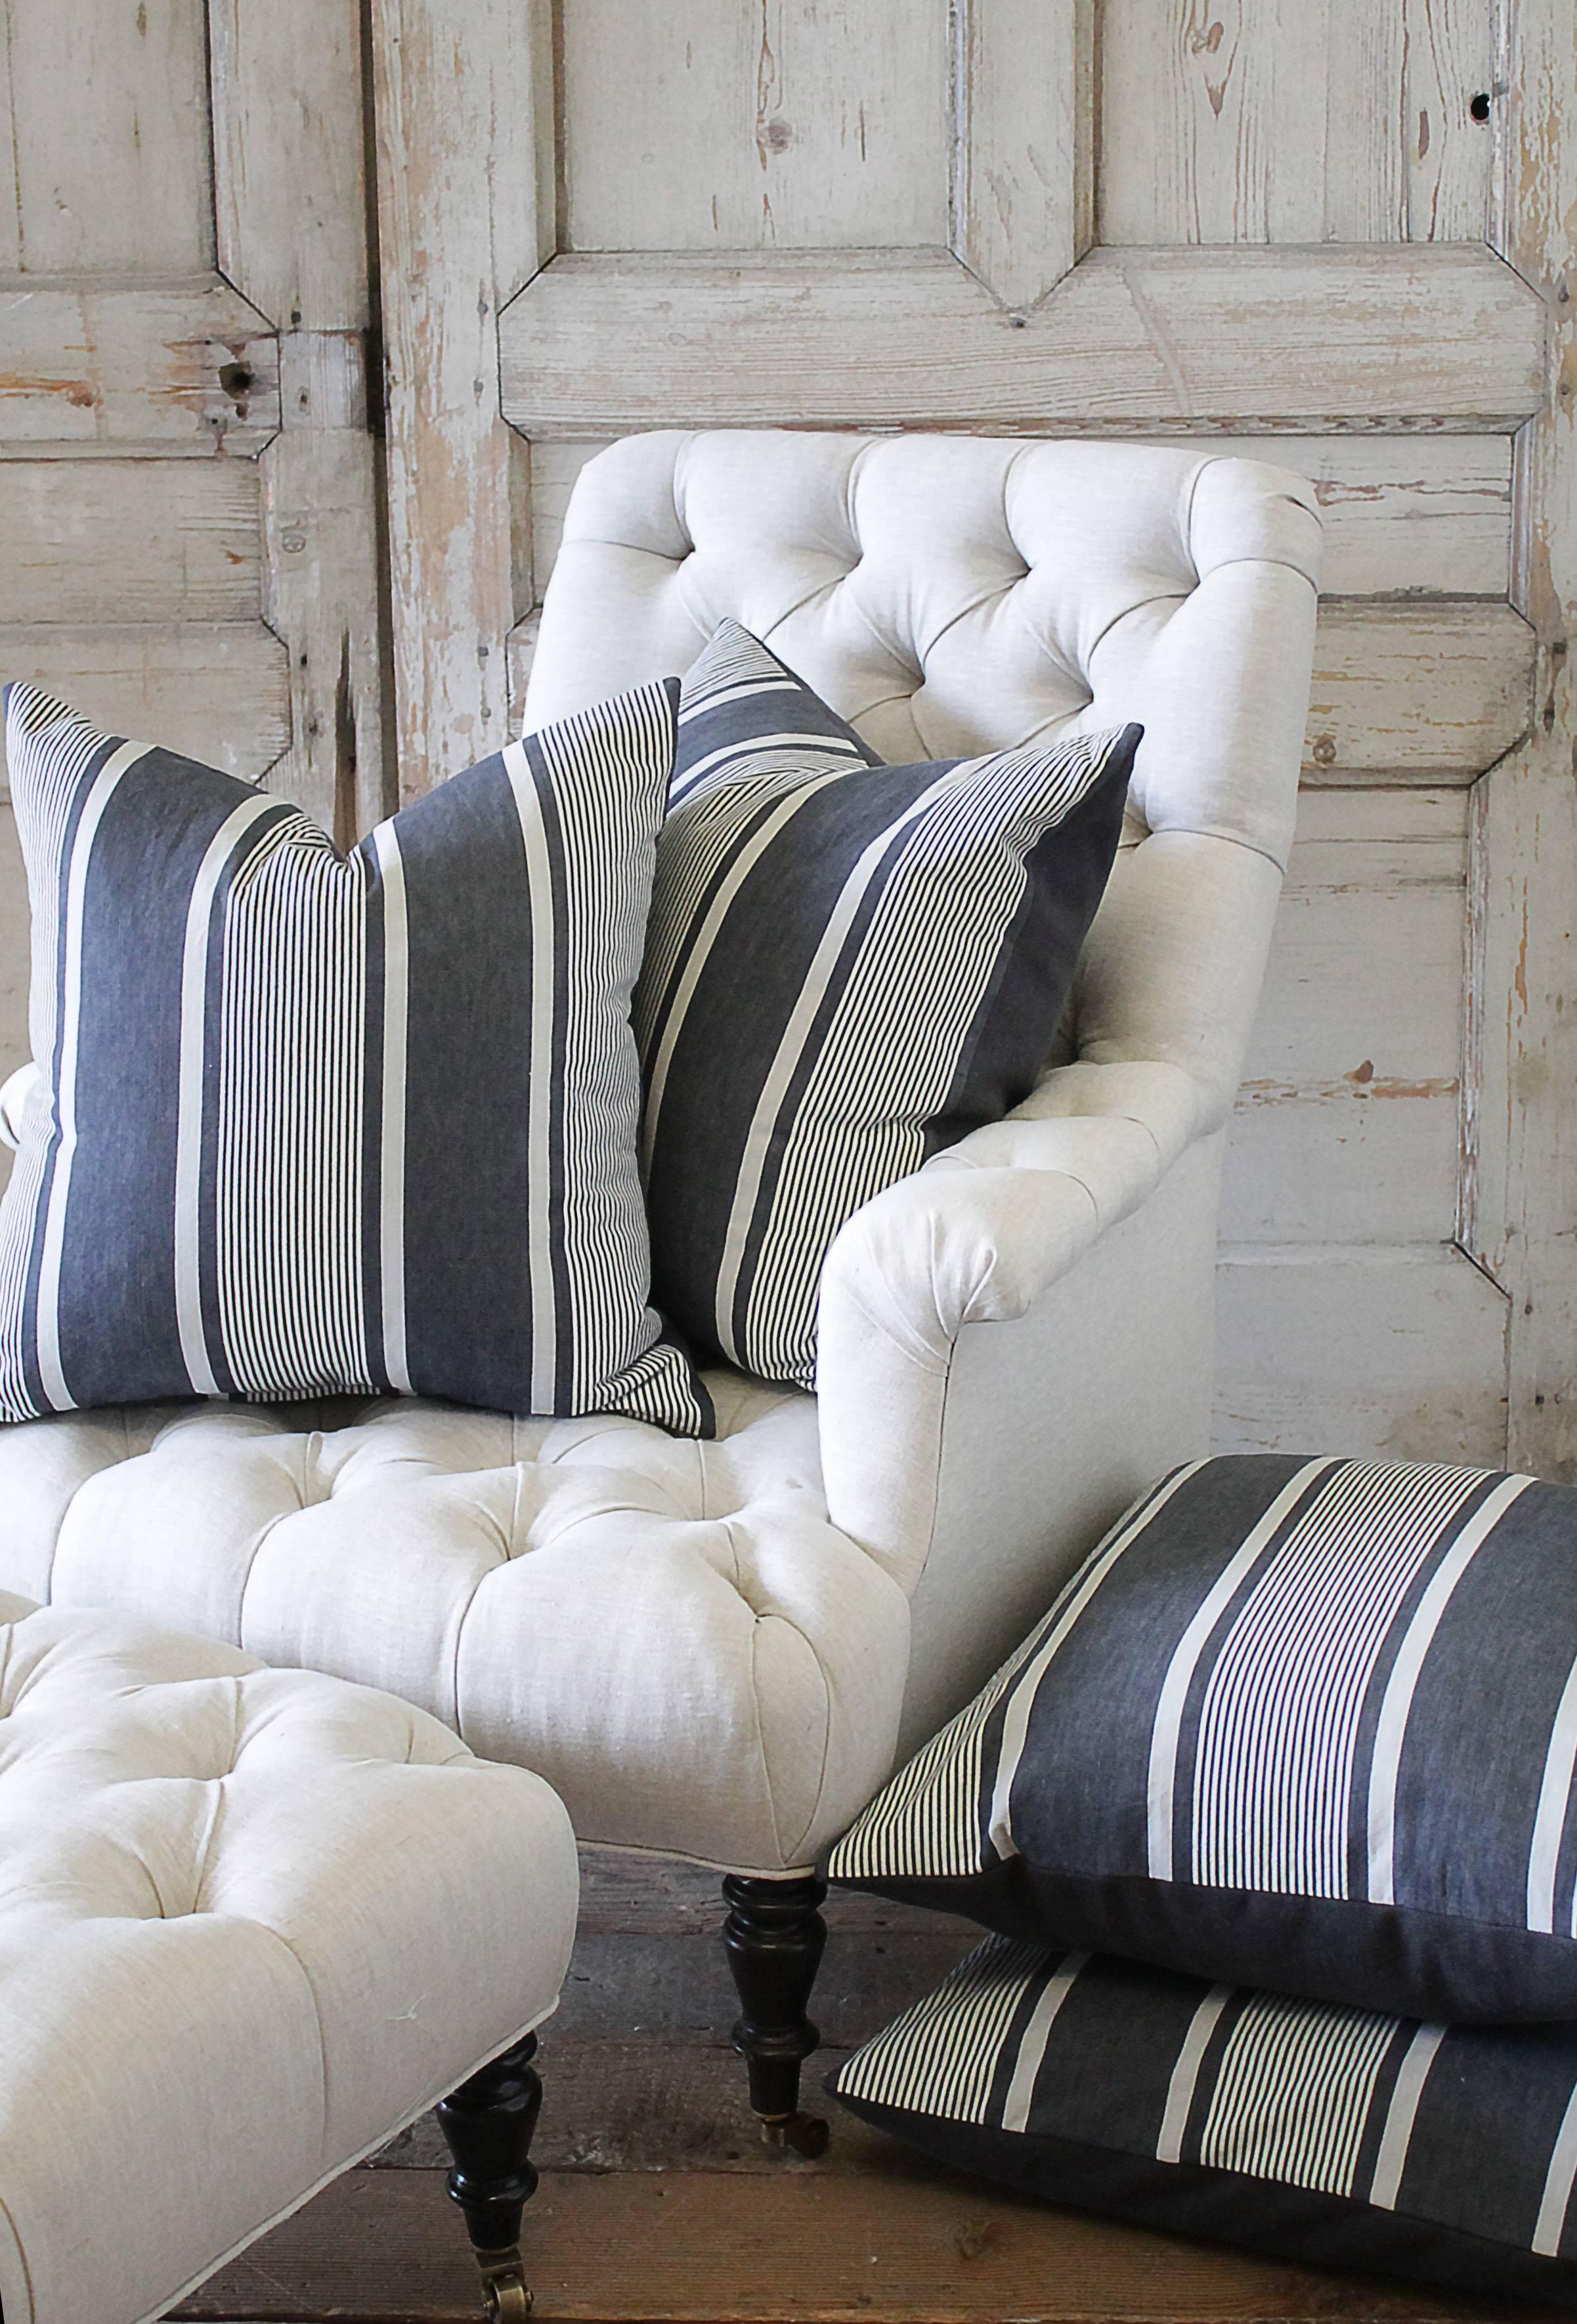 Rustic Antique French Ticking Accent Pillows in Coal